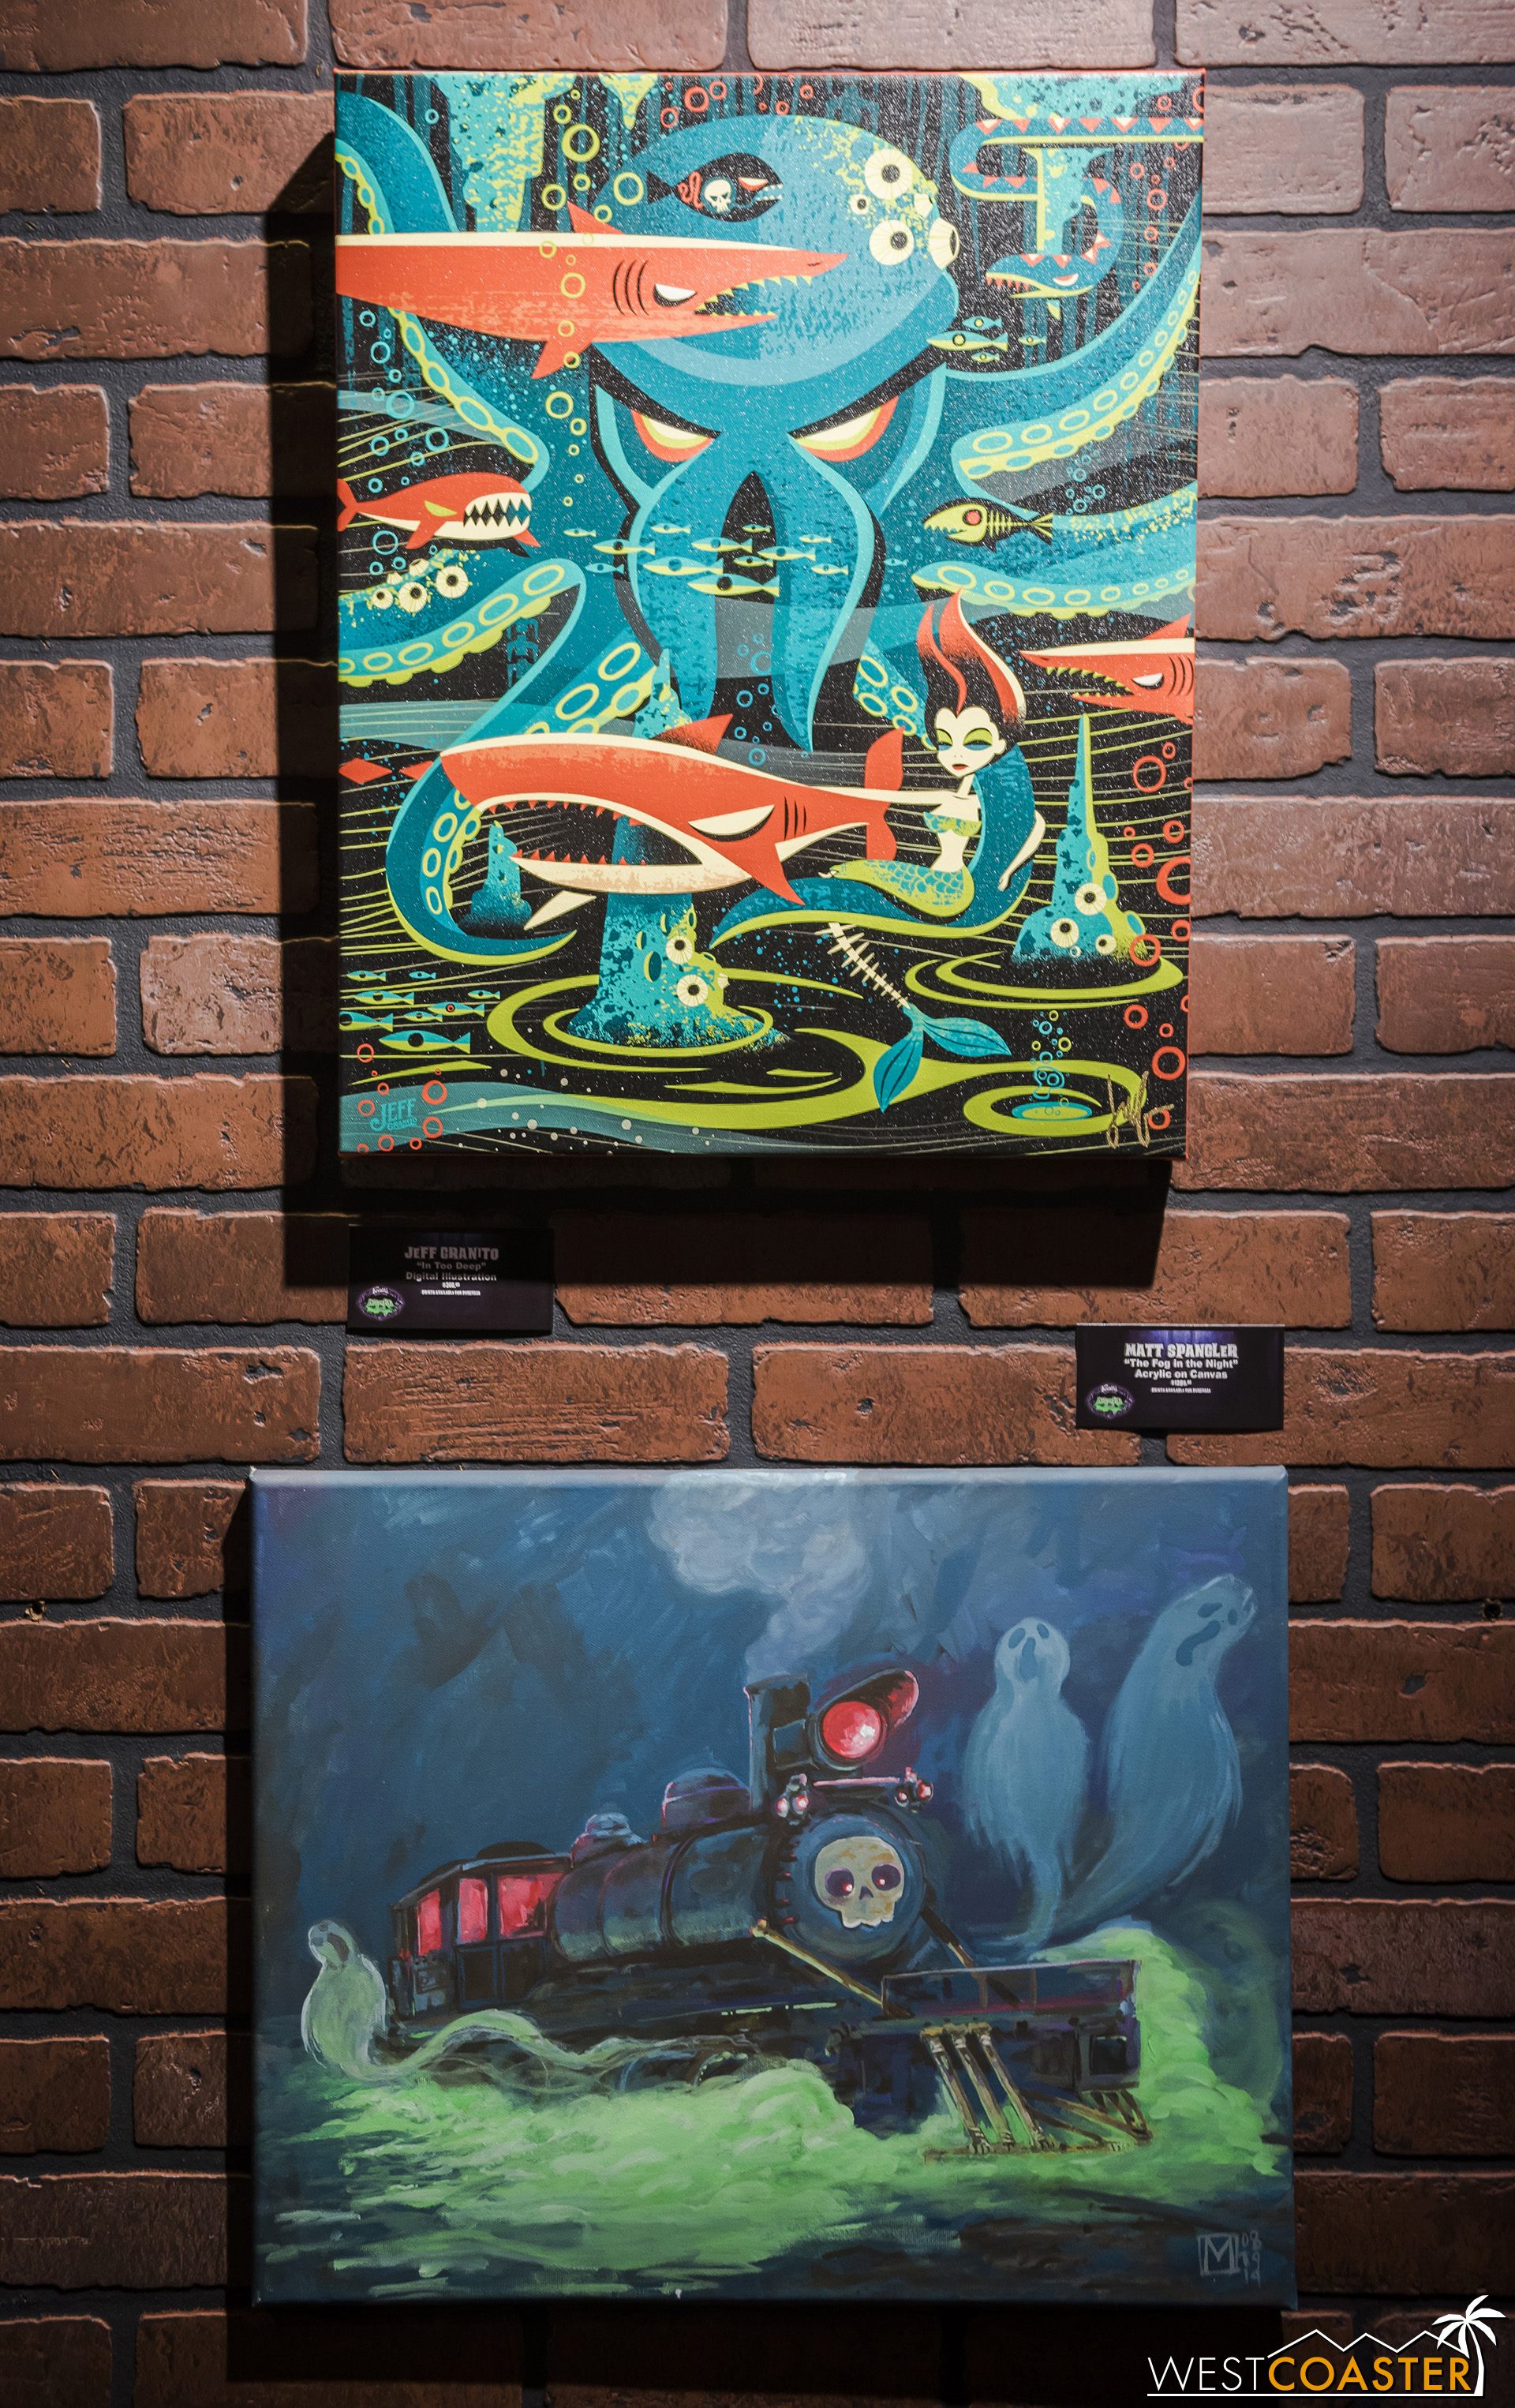  Tiki artist, Jeff Granito contributed to the gallery as well! 